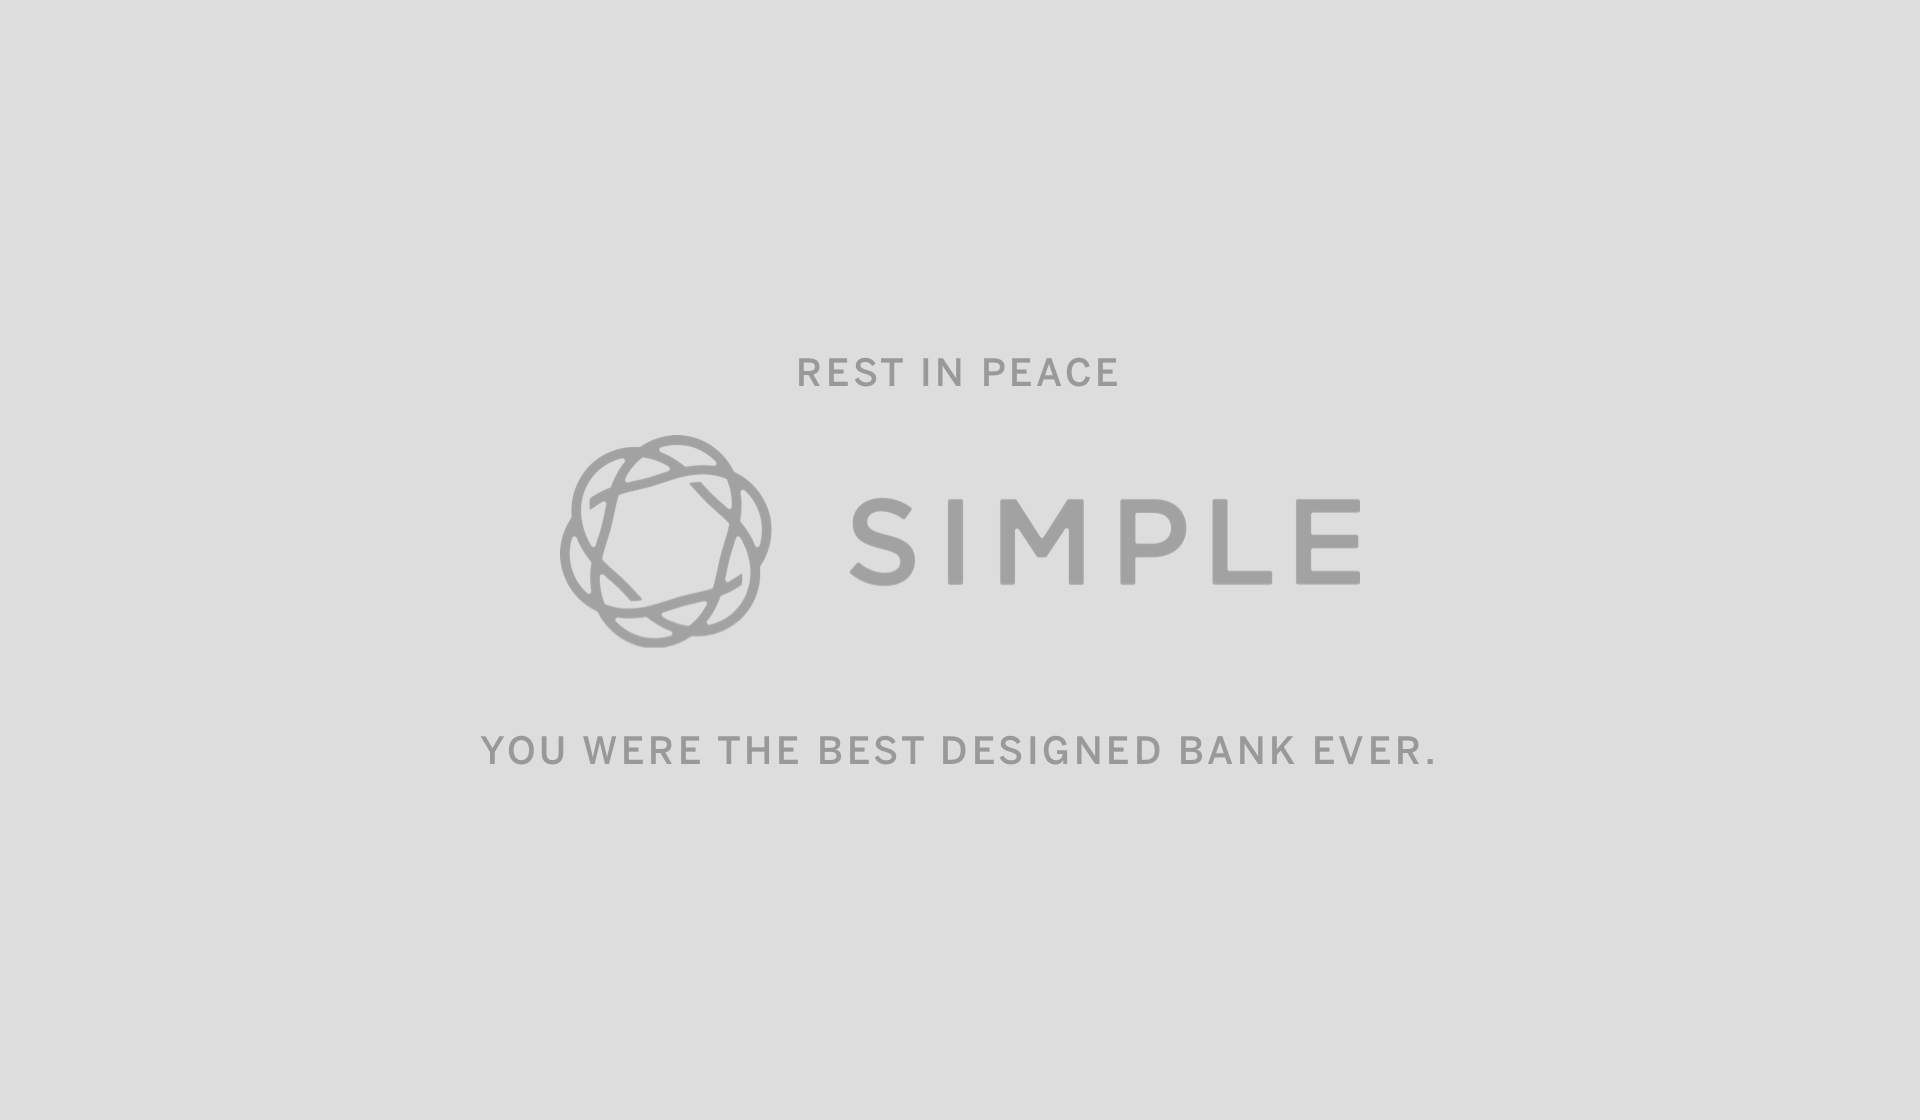 Rest in Peace Simple. You were the best designed Bank EVER.